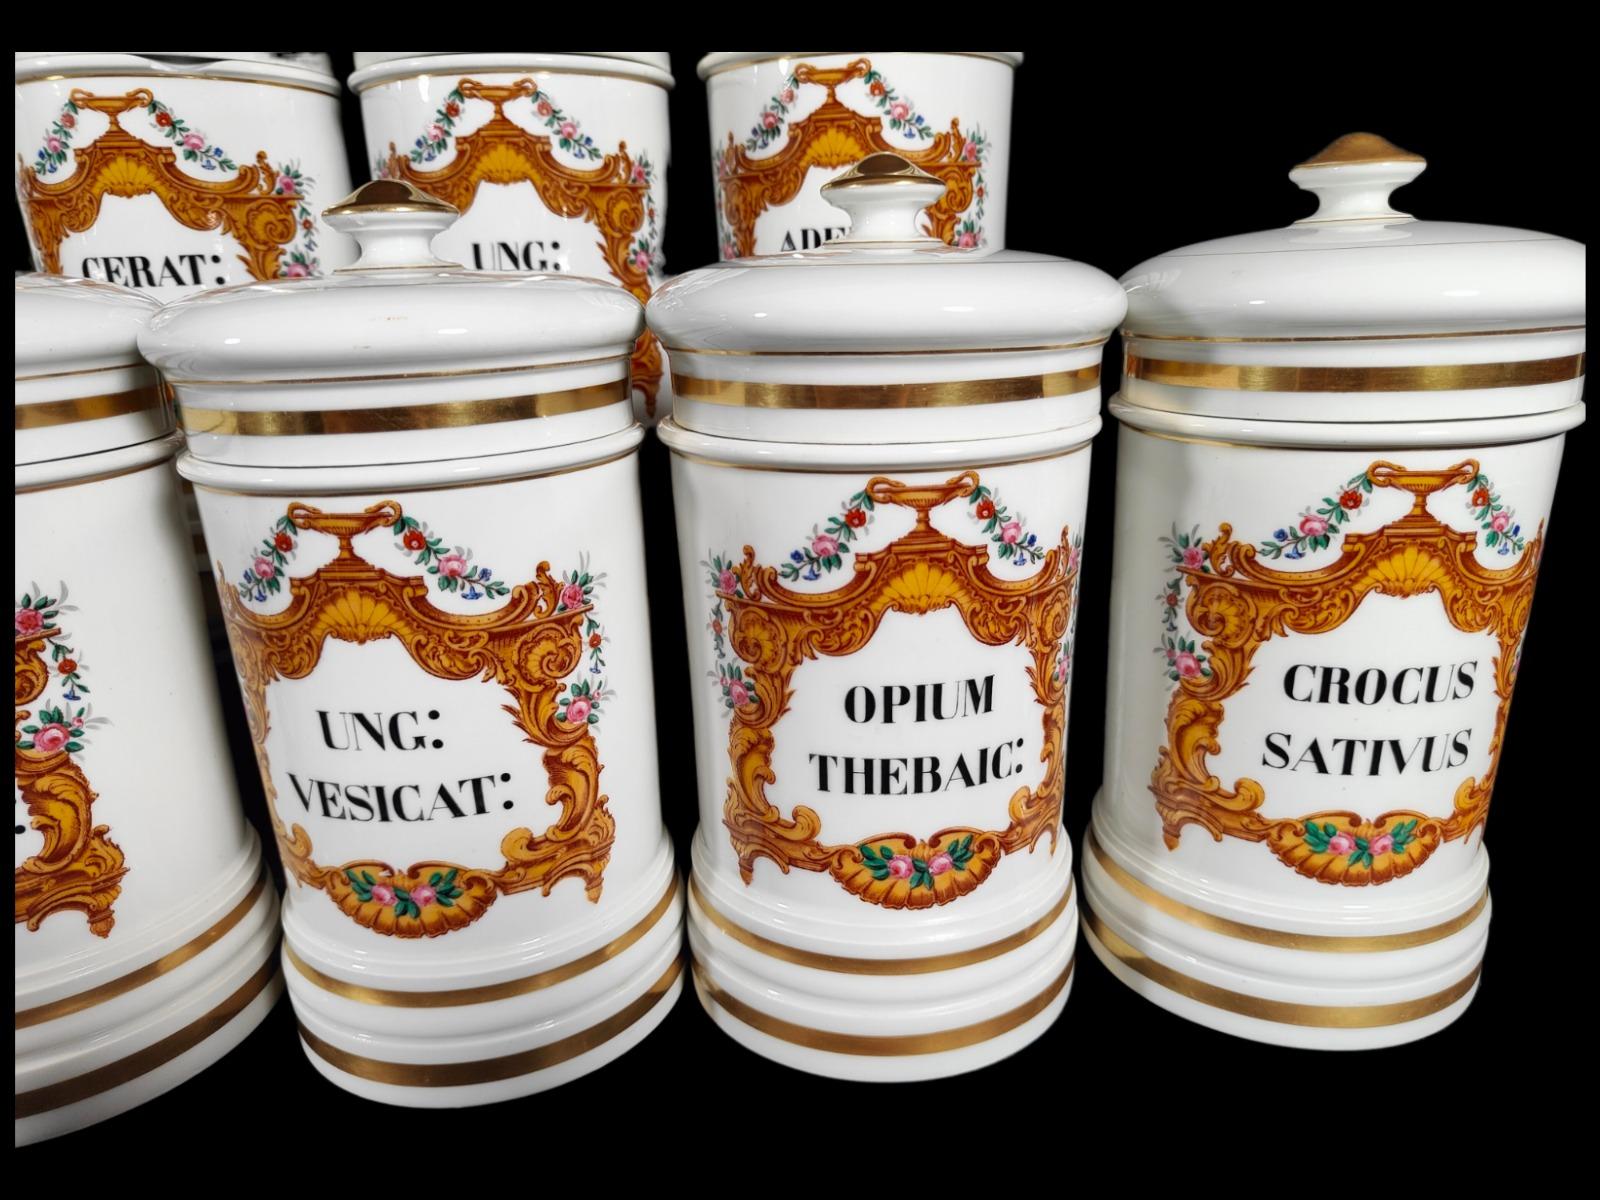 Old French pharmacy porcelain containers. Fontemoing & Peigney XIX CENTURY THEY MEASURE 26 CM HIGH IN TOTAL THERE ARE 20 CONTAINERS IN EXCELLENT CONDITION - DECOR WITH VERY DECORATIVE FLORAL DRAWINGS
Good condition.